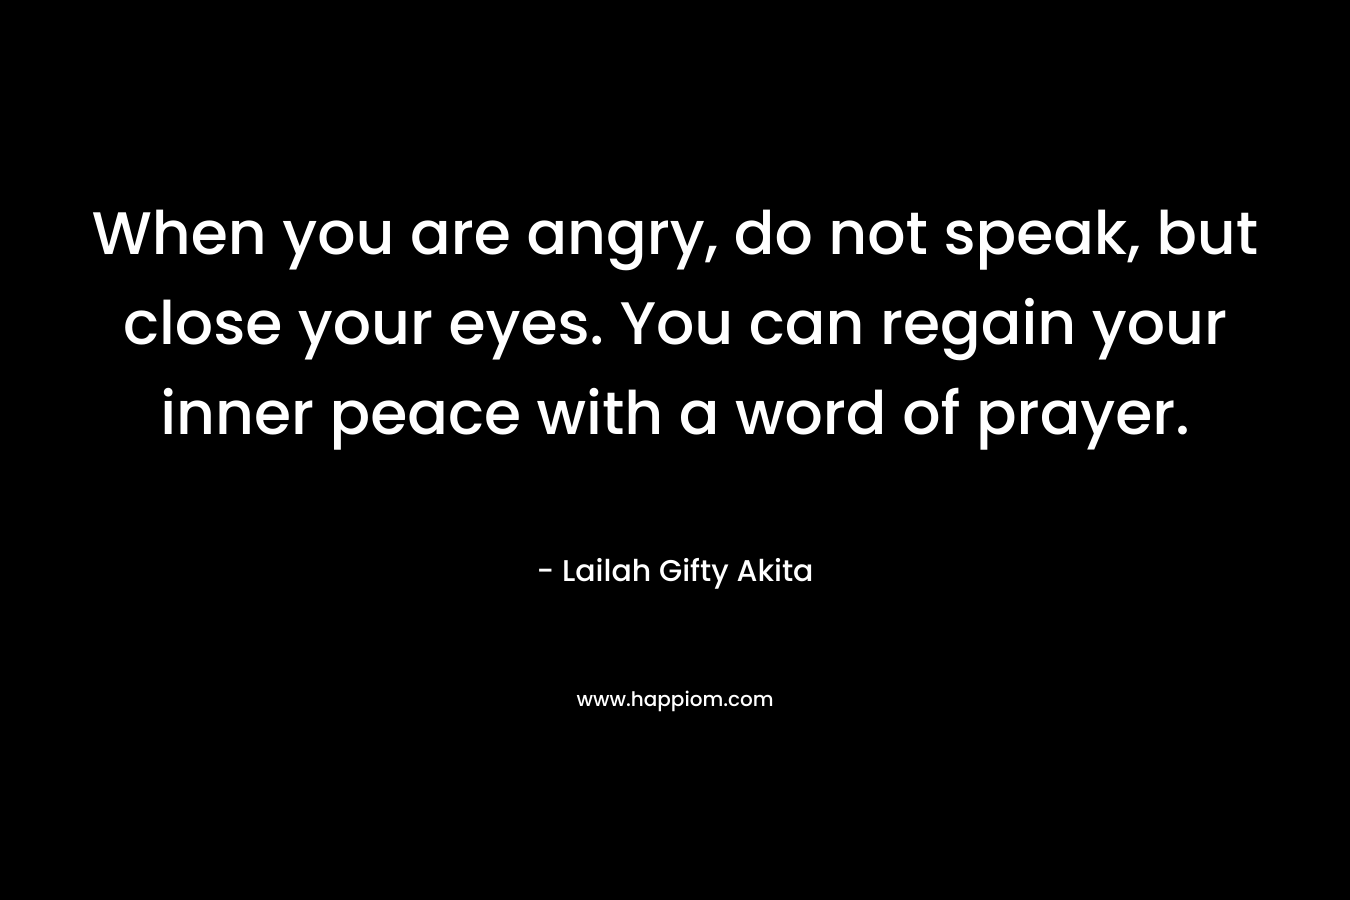 When you are angry, do not speak, but close your eyes. You can regain your inner peace with a word of prayer. – Lailah Gifty Akita